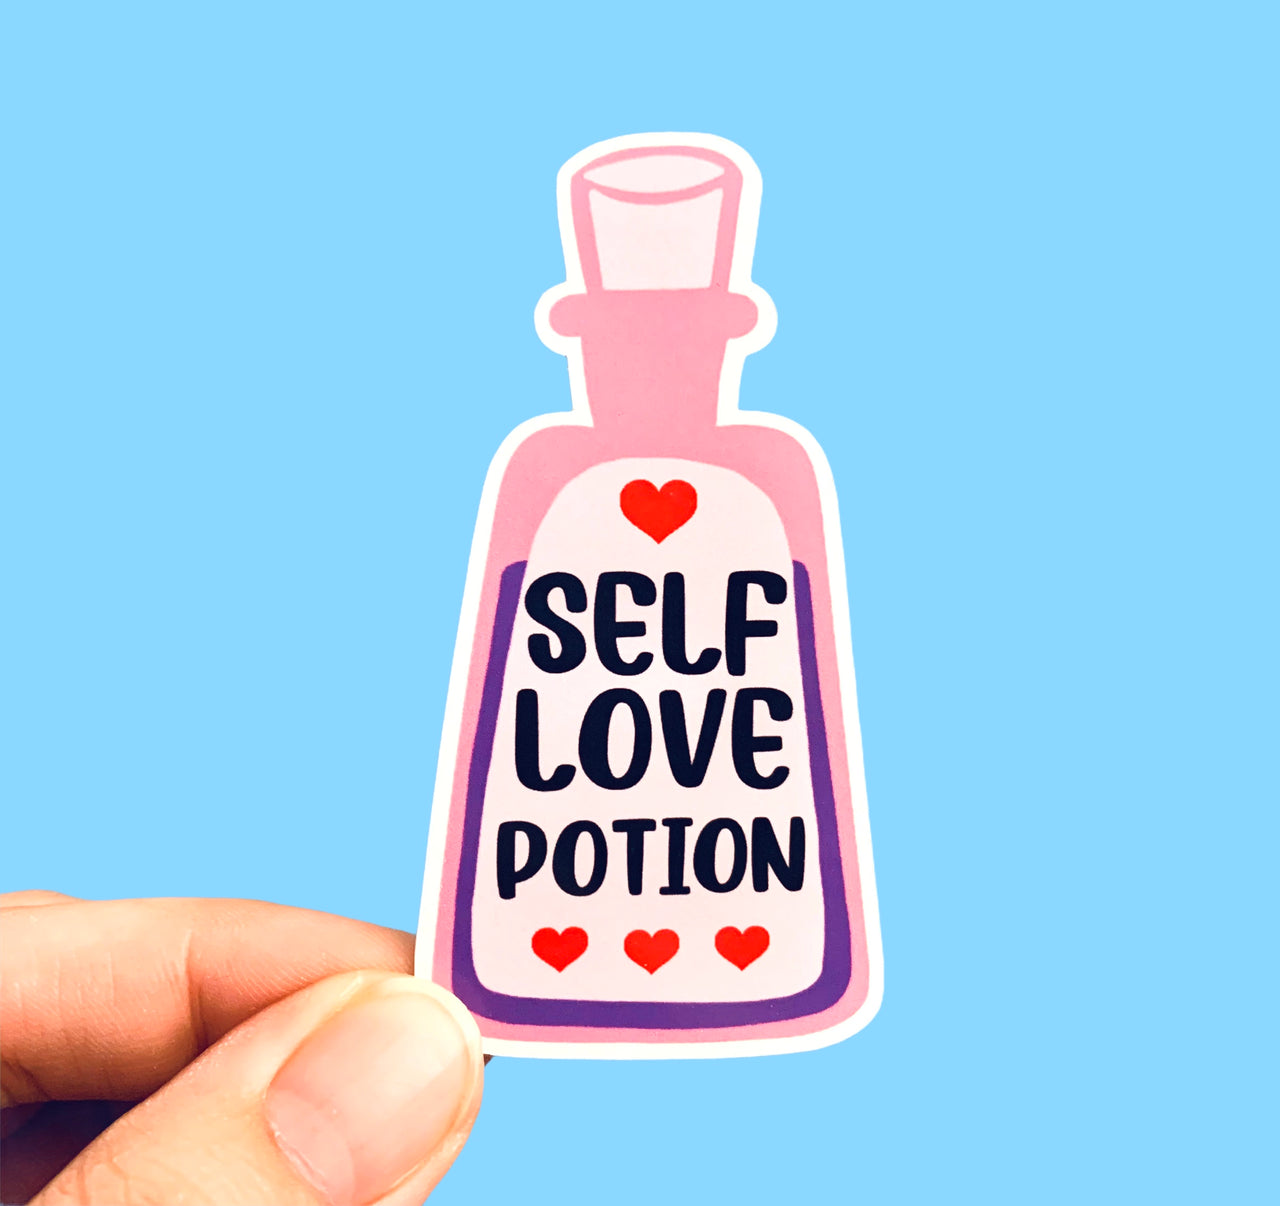 Self love potion stickers (pack of 3 or 5)